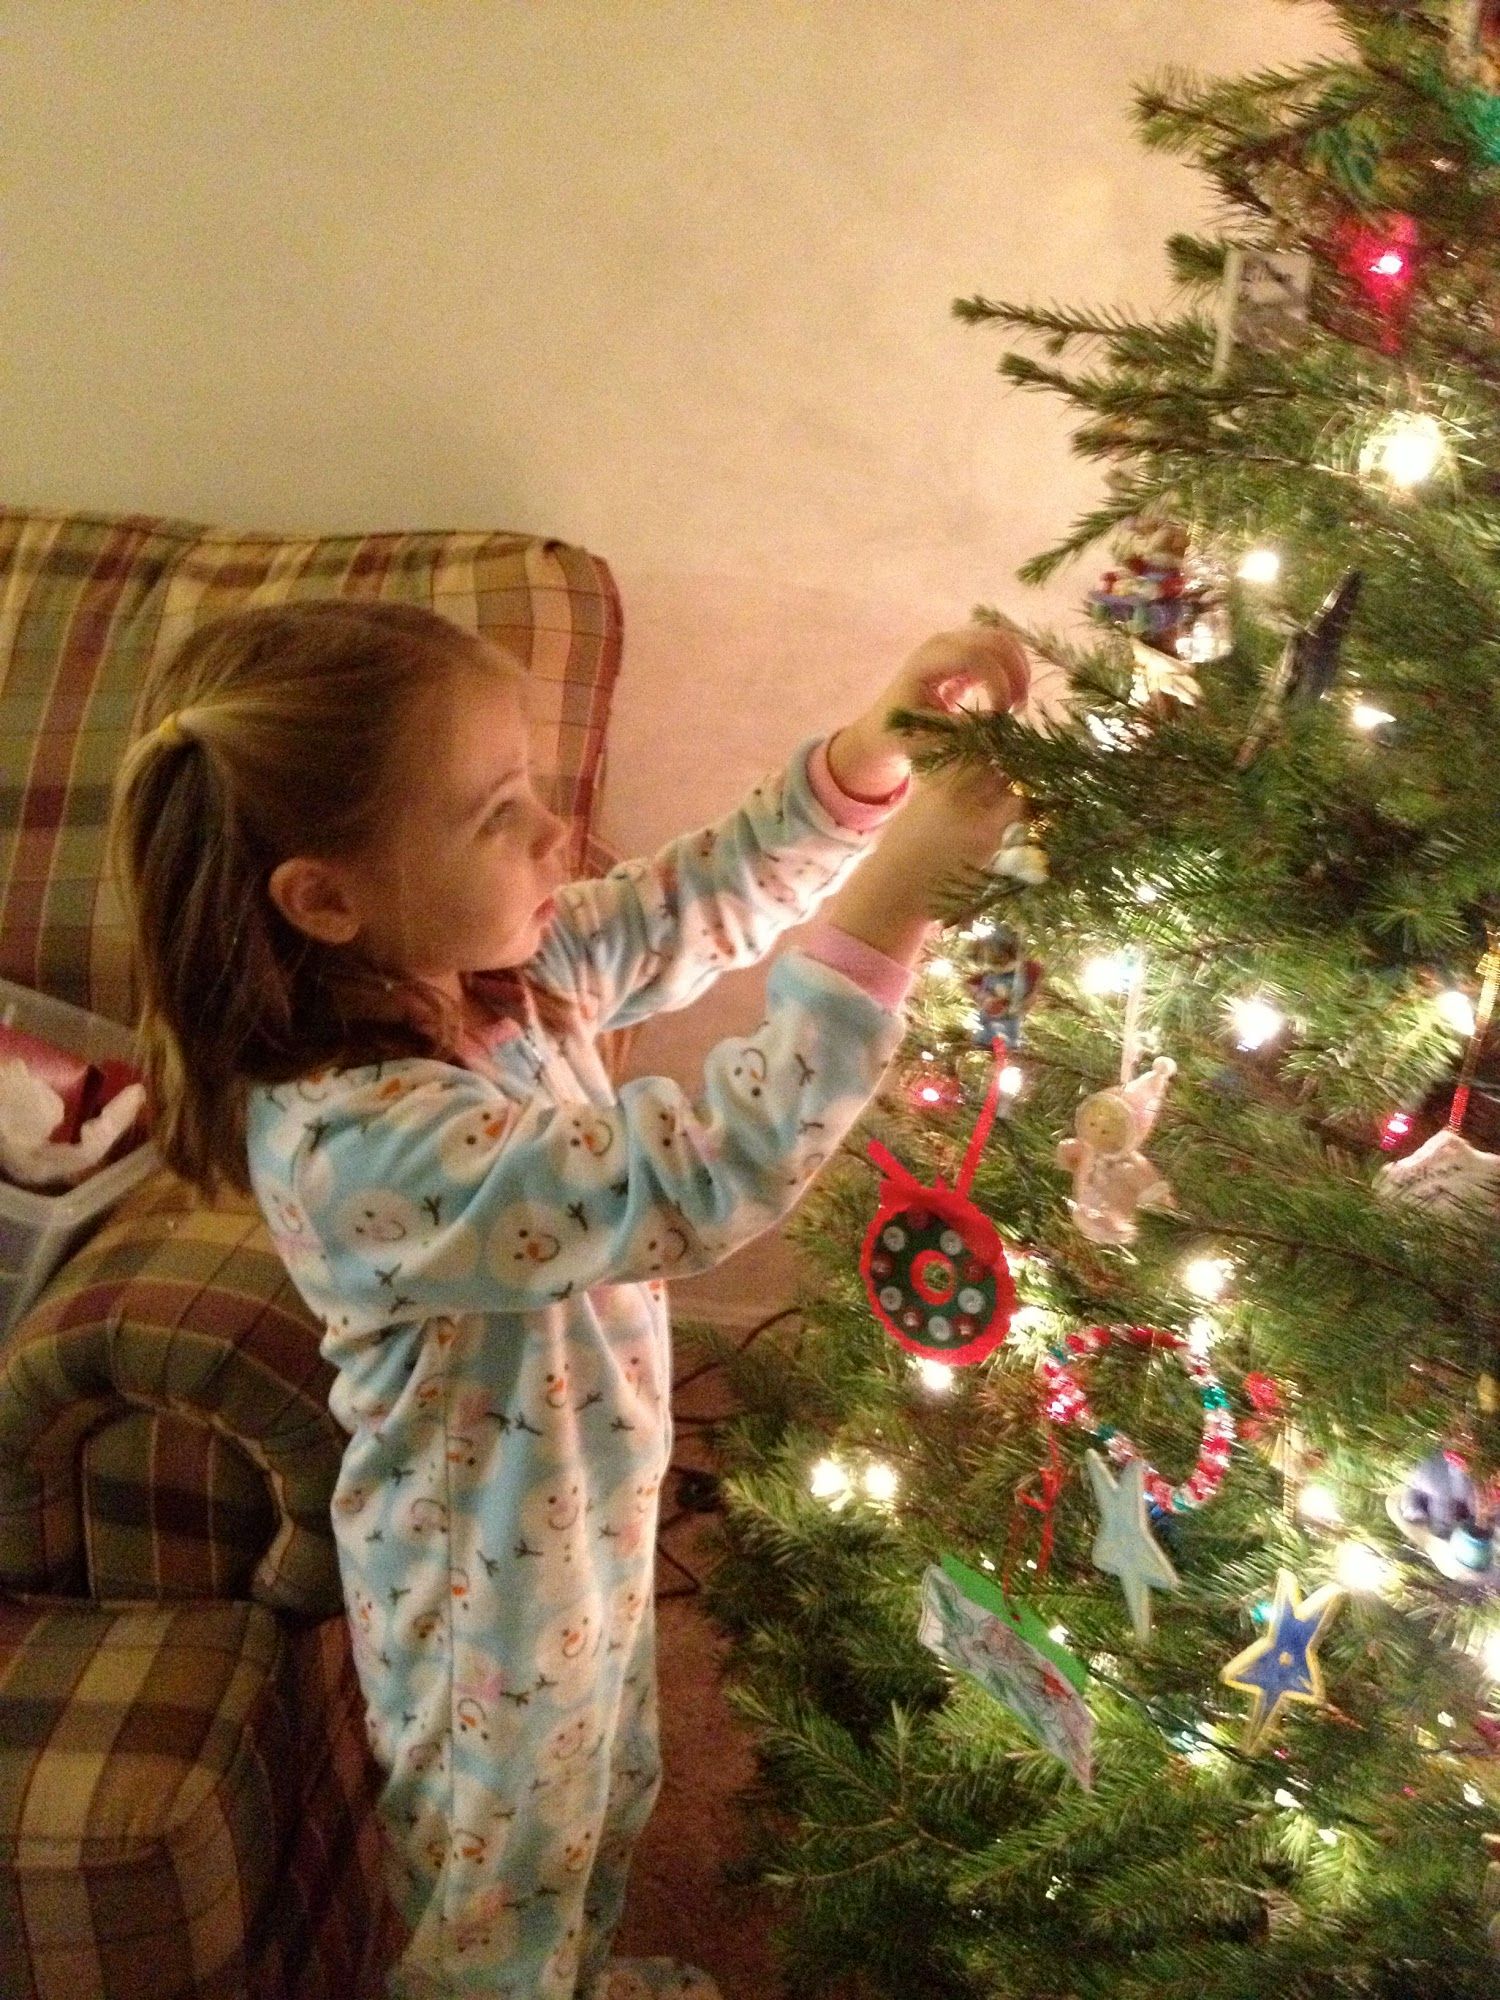  Another favorite picture.Buggy hanging her ornaments  